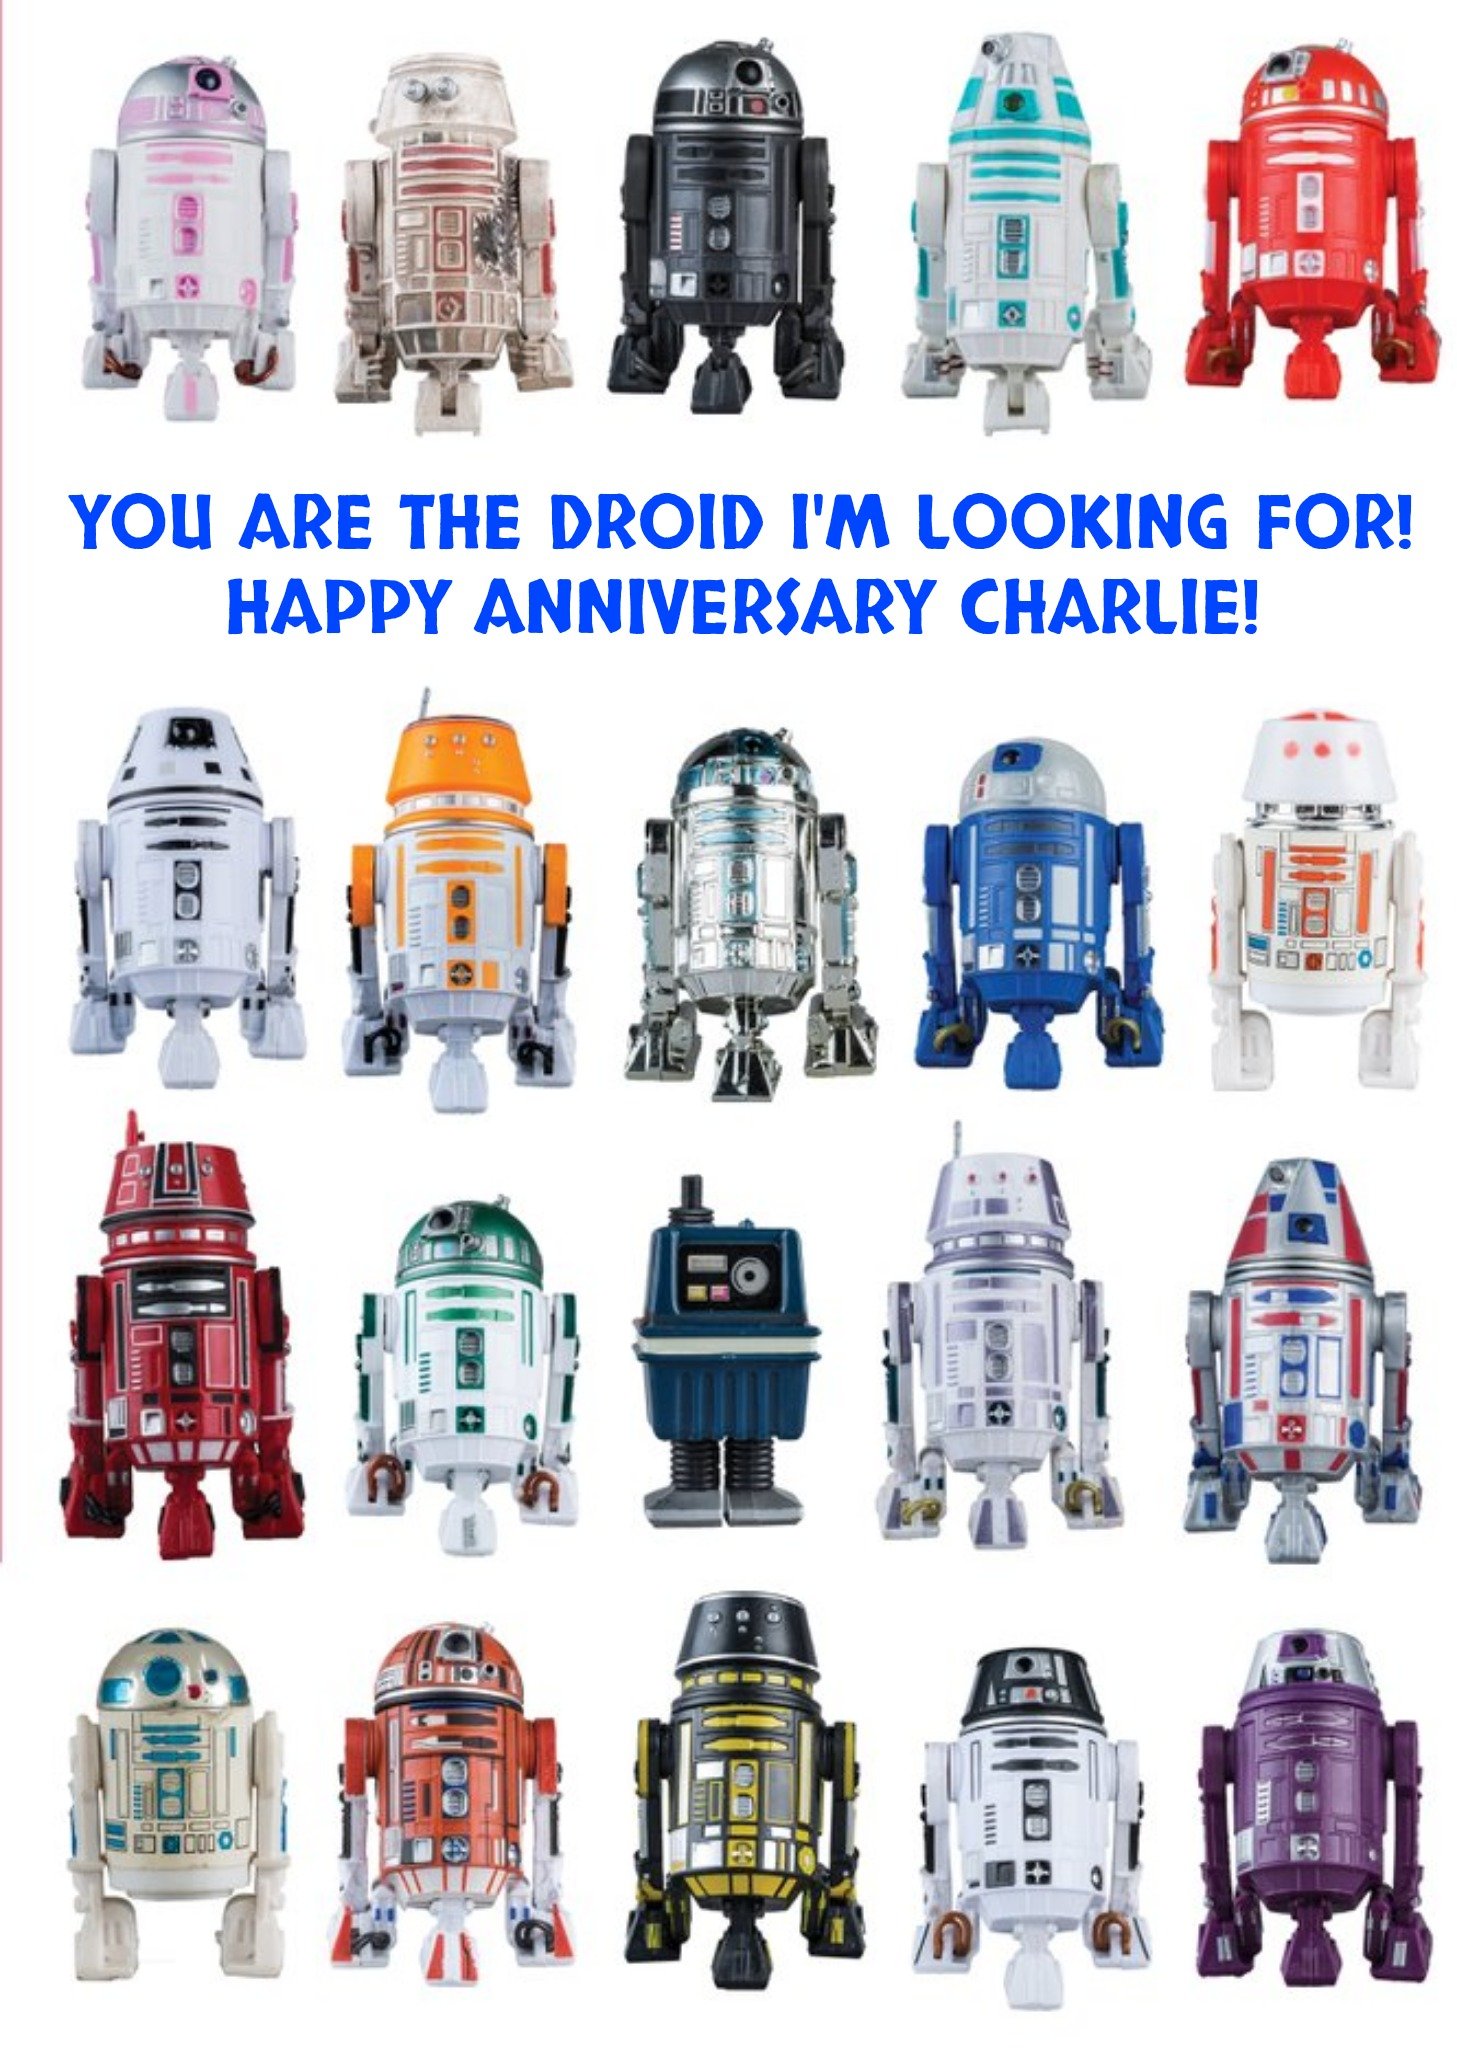 Disney Star Wars You Are The Droid I'm Looking For Anniversary Card, Large